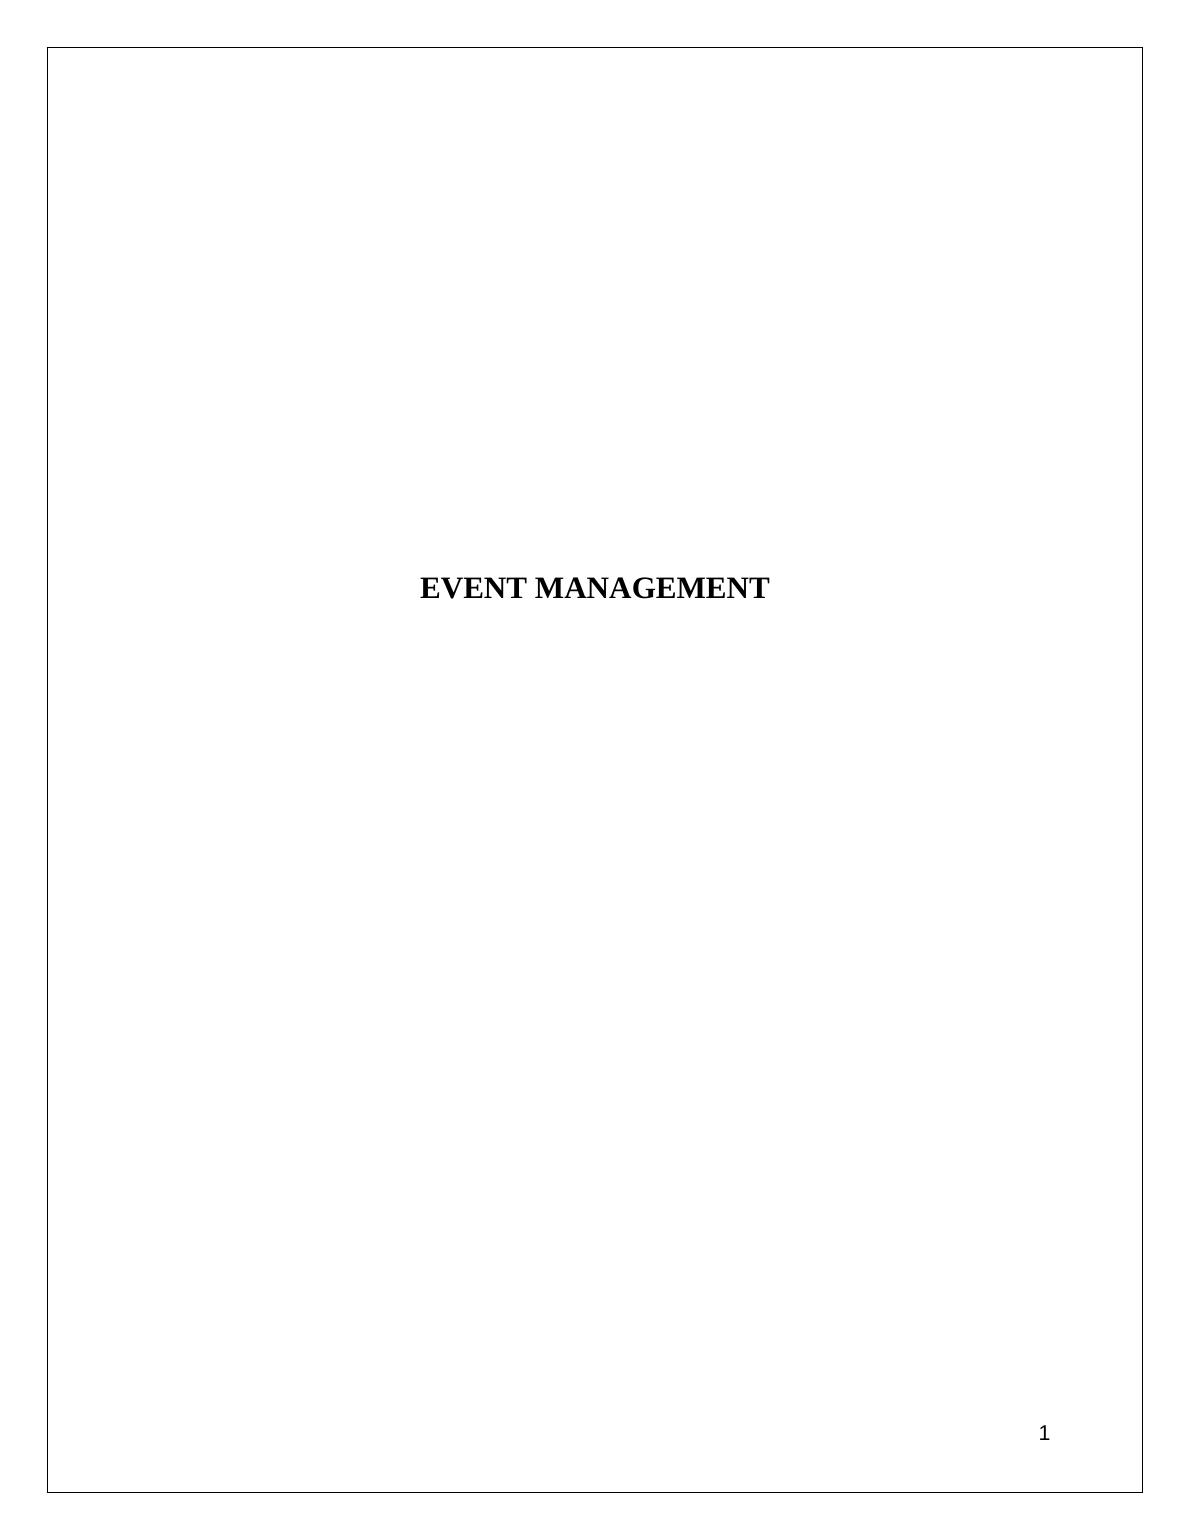 Assignment on Event Management_1